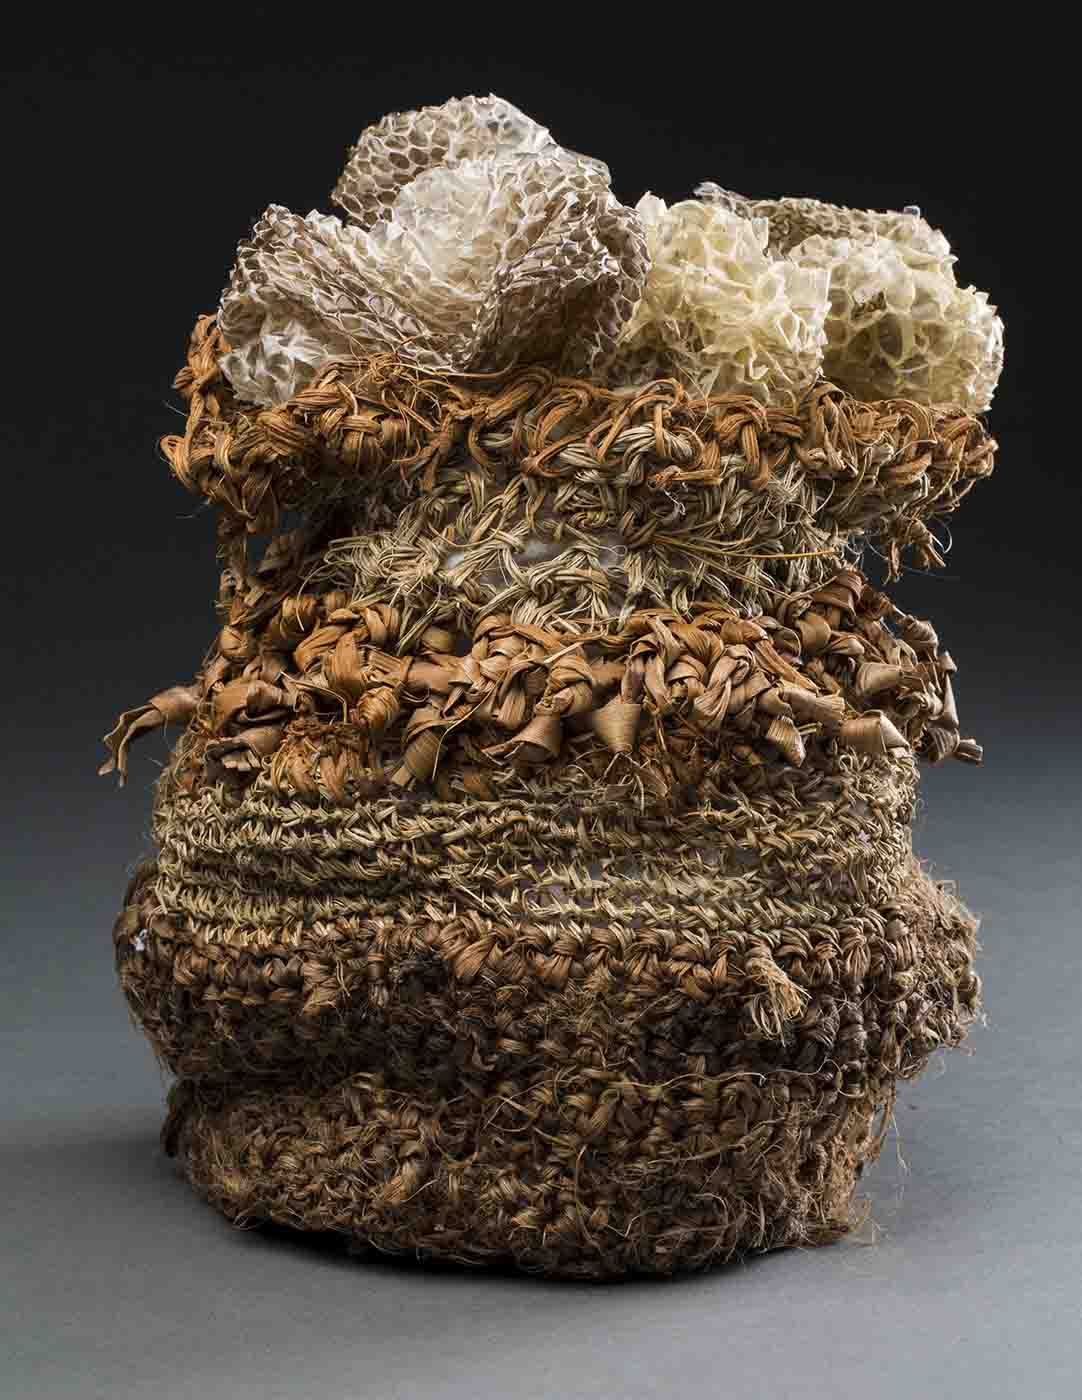 A vertical woven bag with a round base made of various types of fibres that are different shades of brown. Placed on top of the bag inside it is a long curled piece of snake skin which is also different shades of brown. - click to view larger image